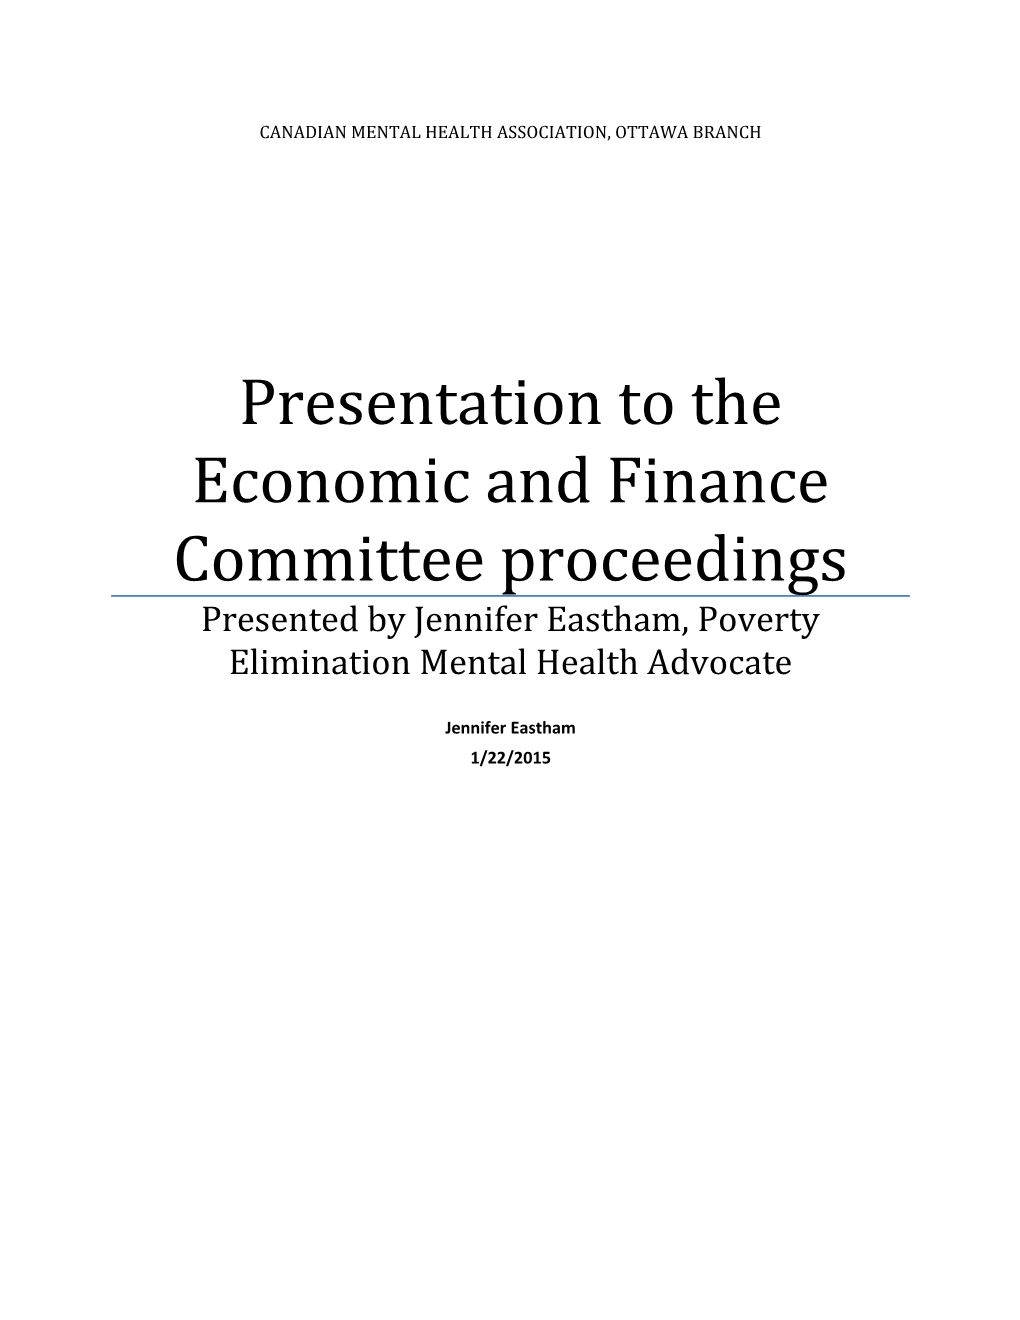 Presentation to the Economic and Finance Committee Proceedings